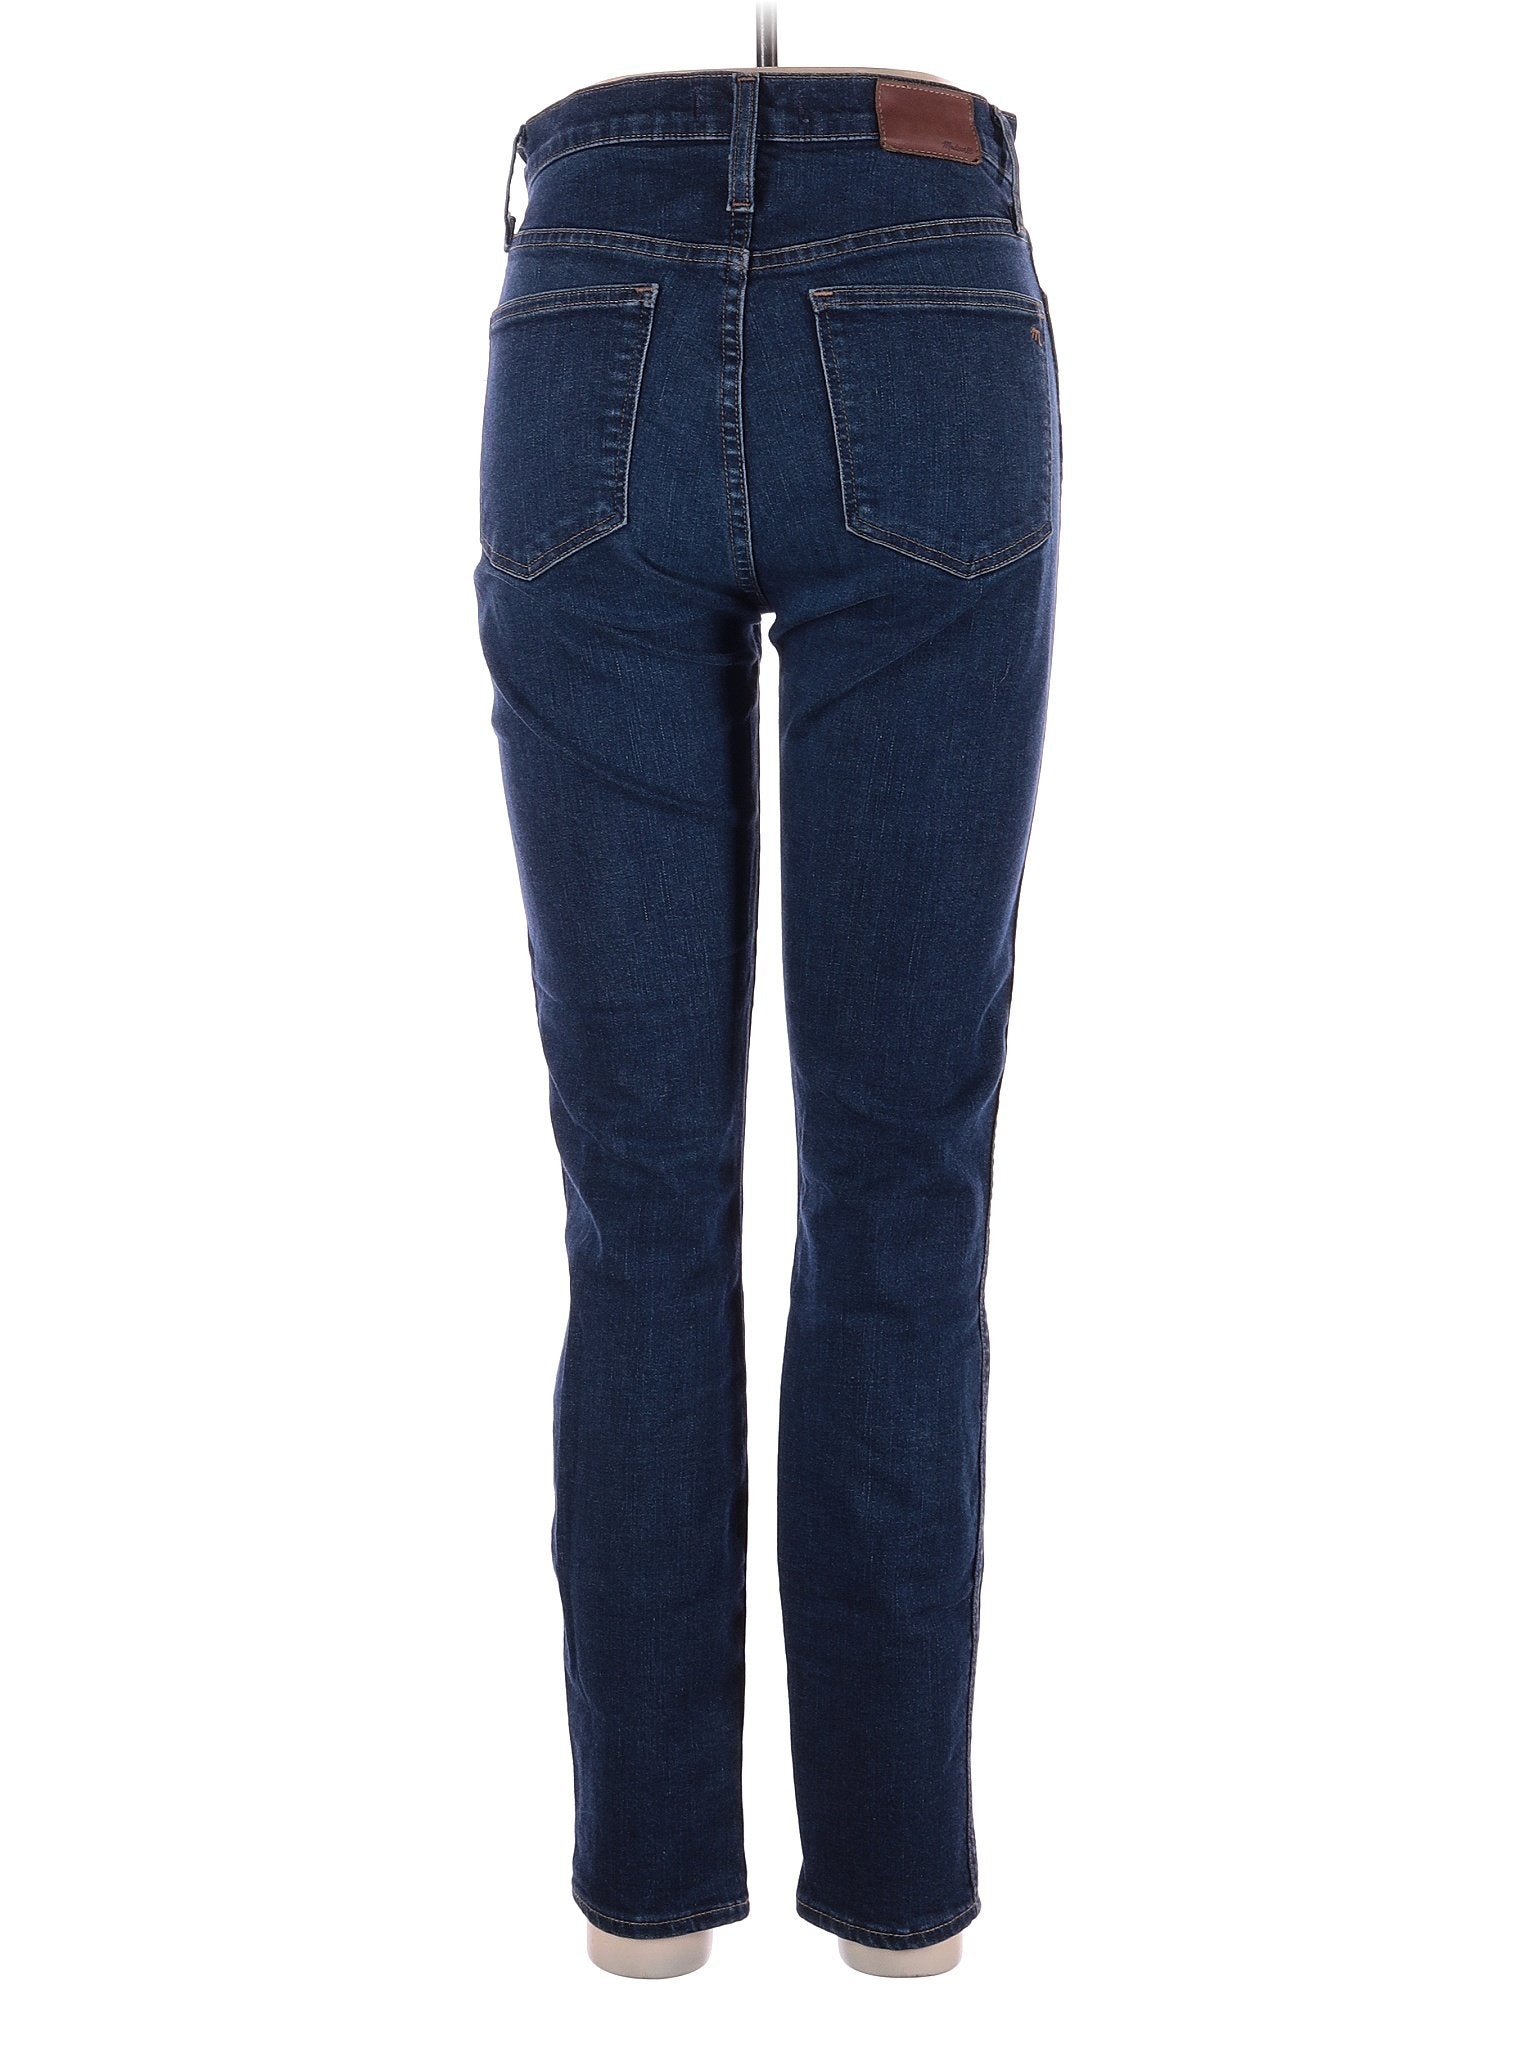 High-Rise Skinny 10" High-Rise Skinny Jeans In Lucille Wash in Dark Wash waist size - 28